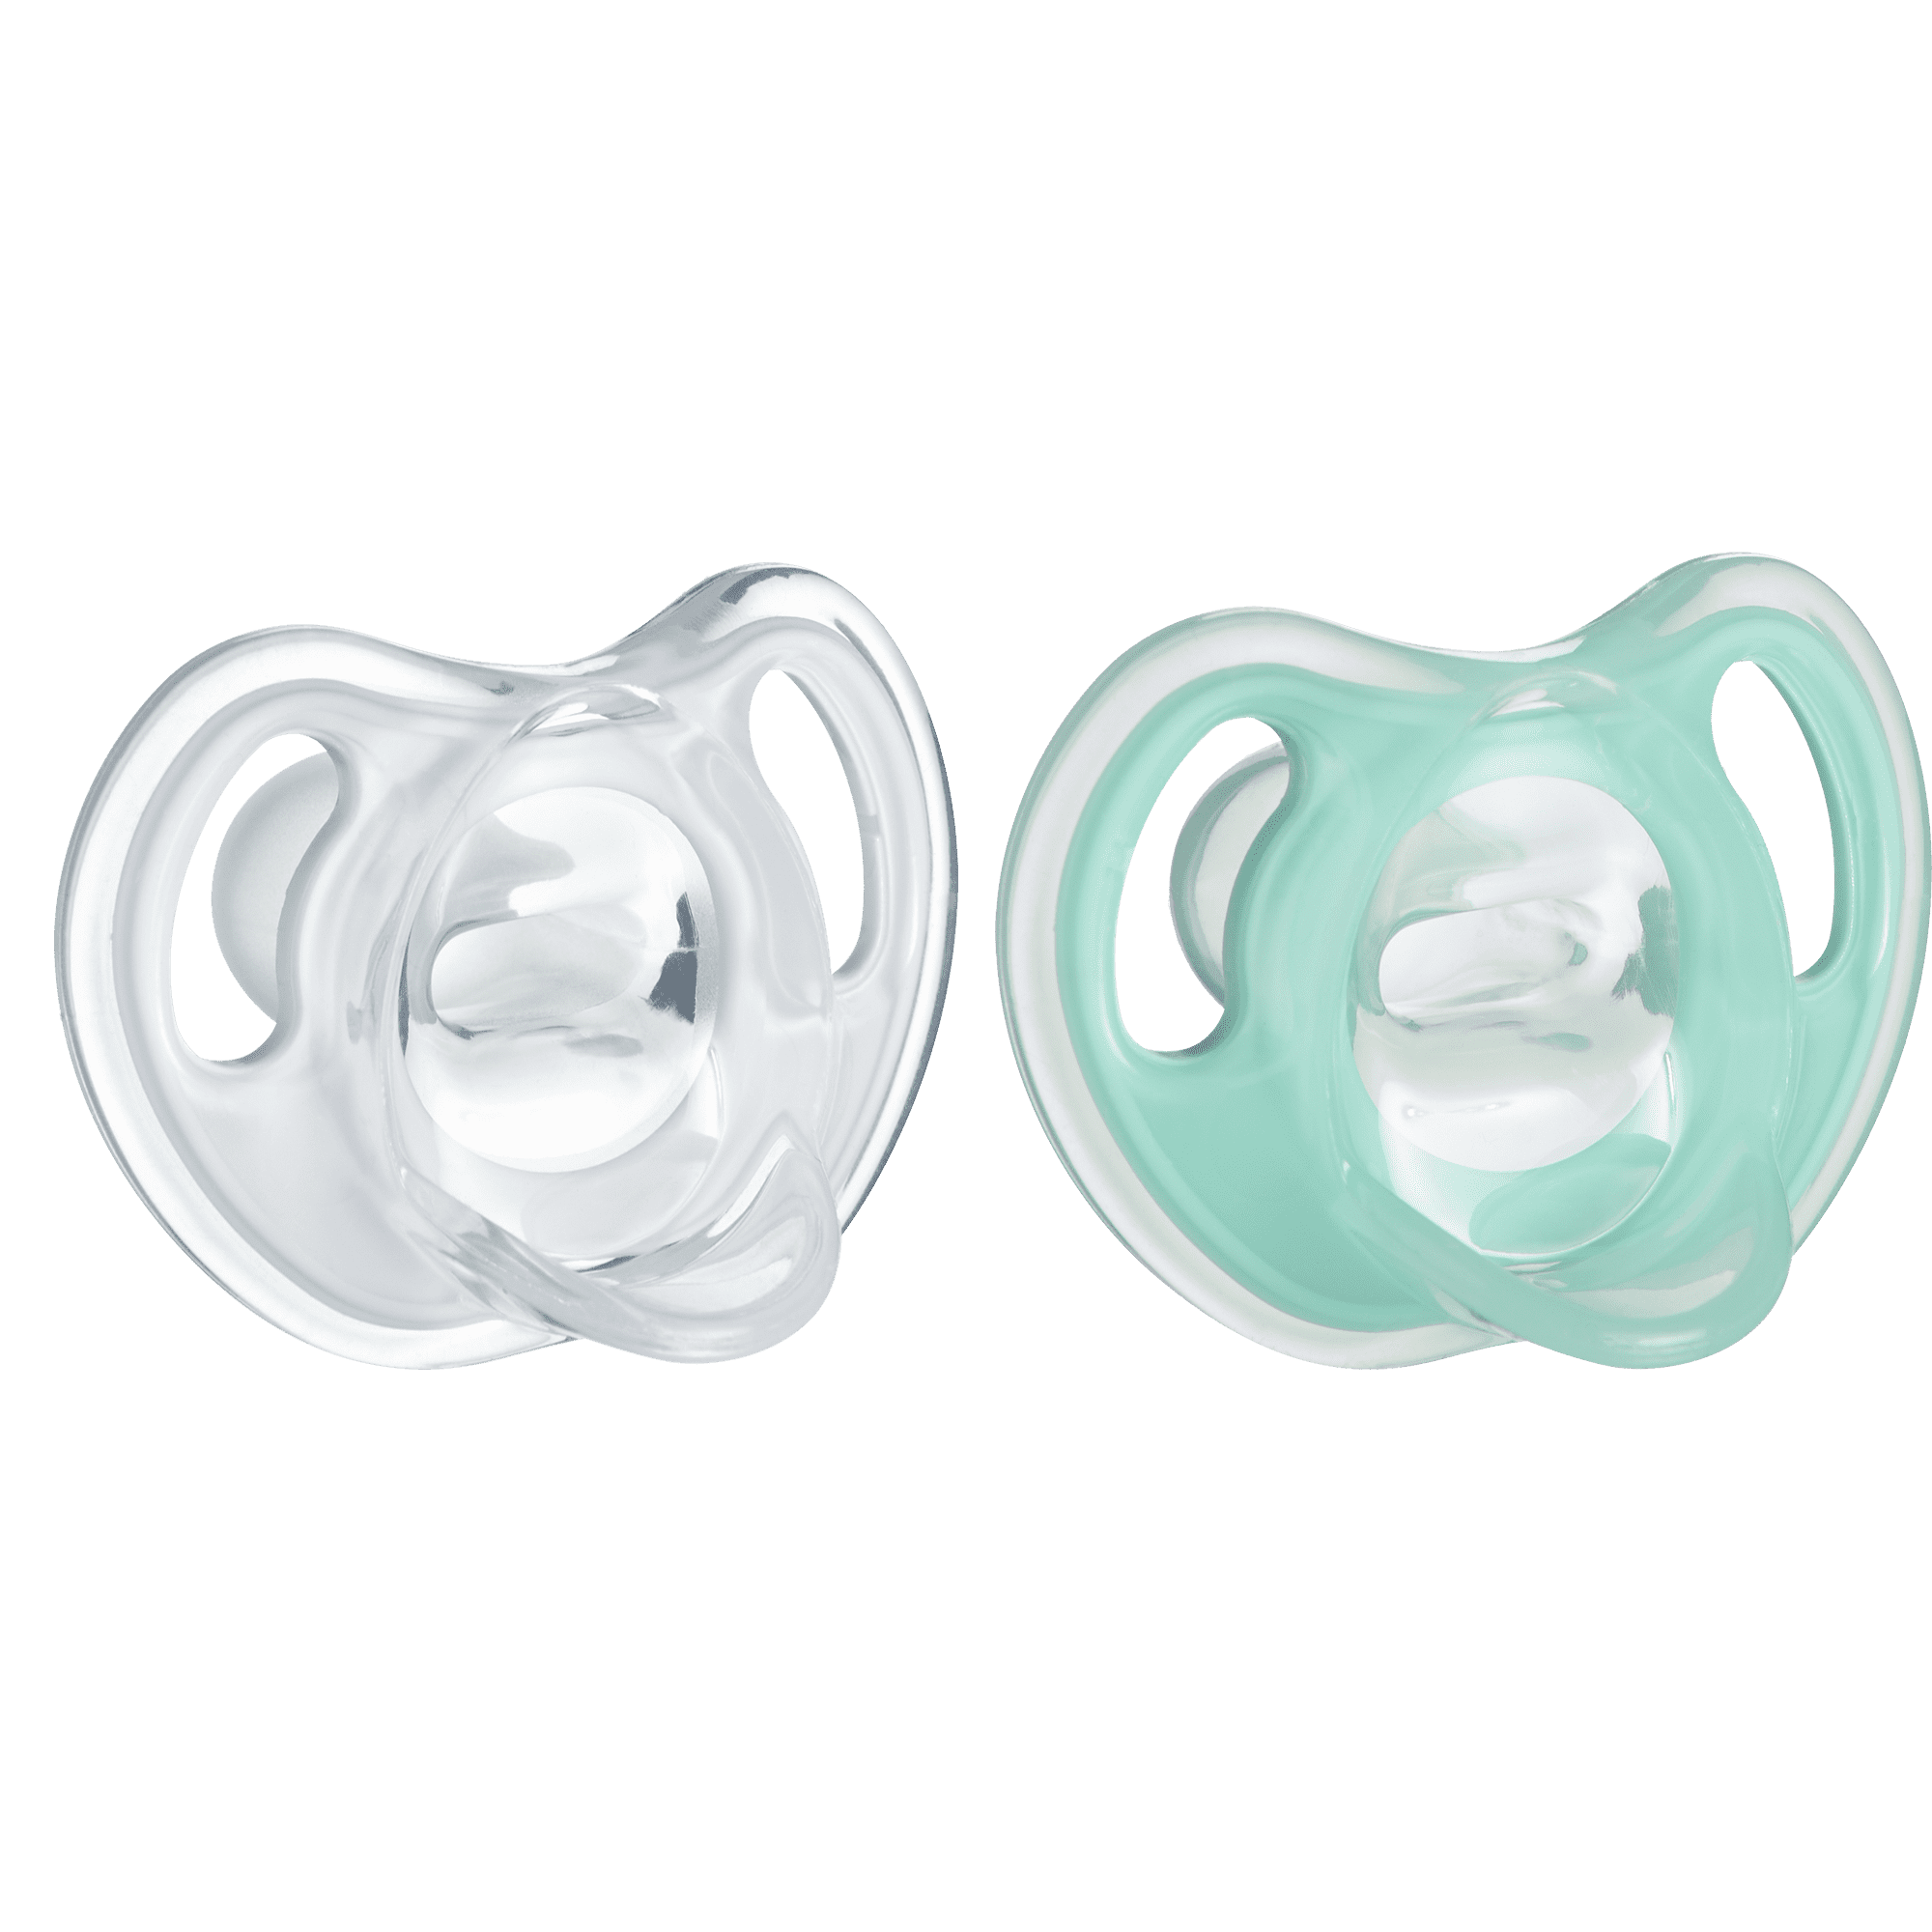 Sucette en silicone ultra légère x2, Tommee Tippee de Tommee Tippee